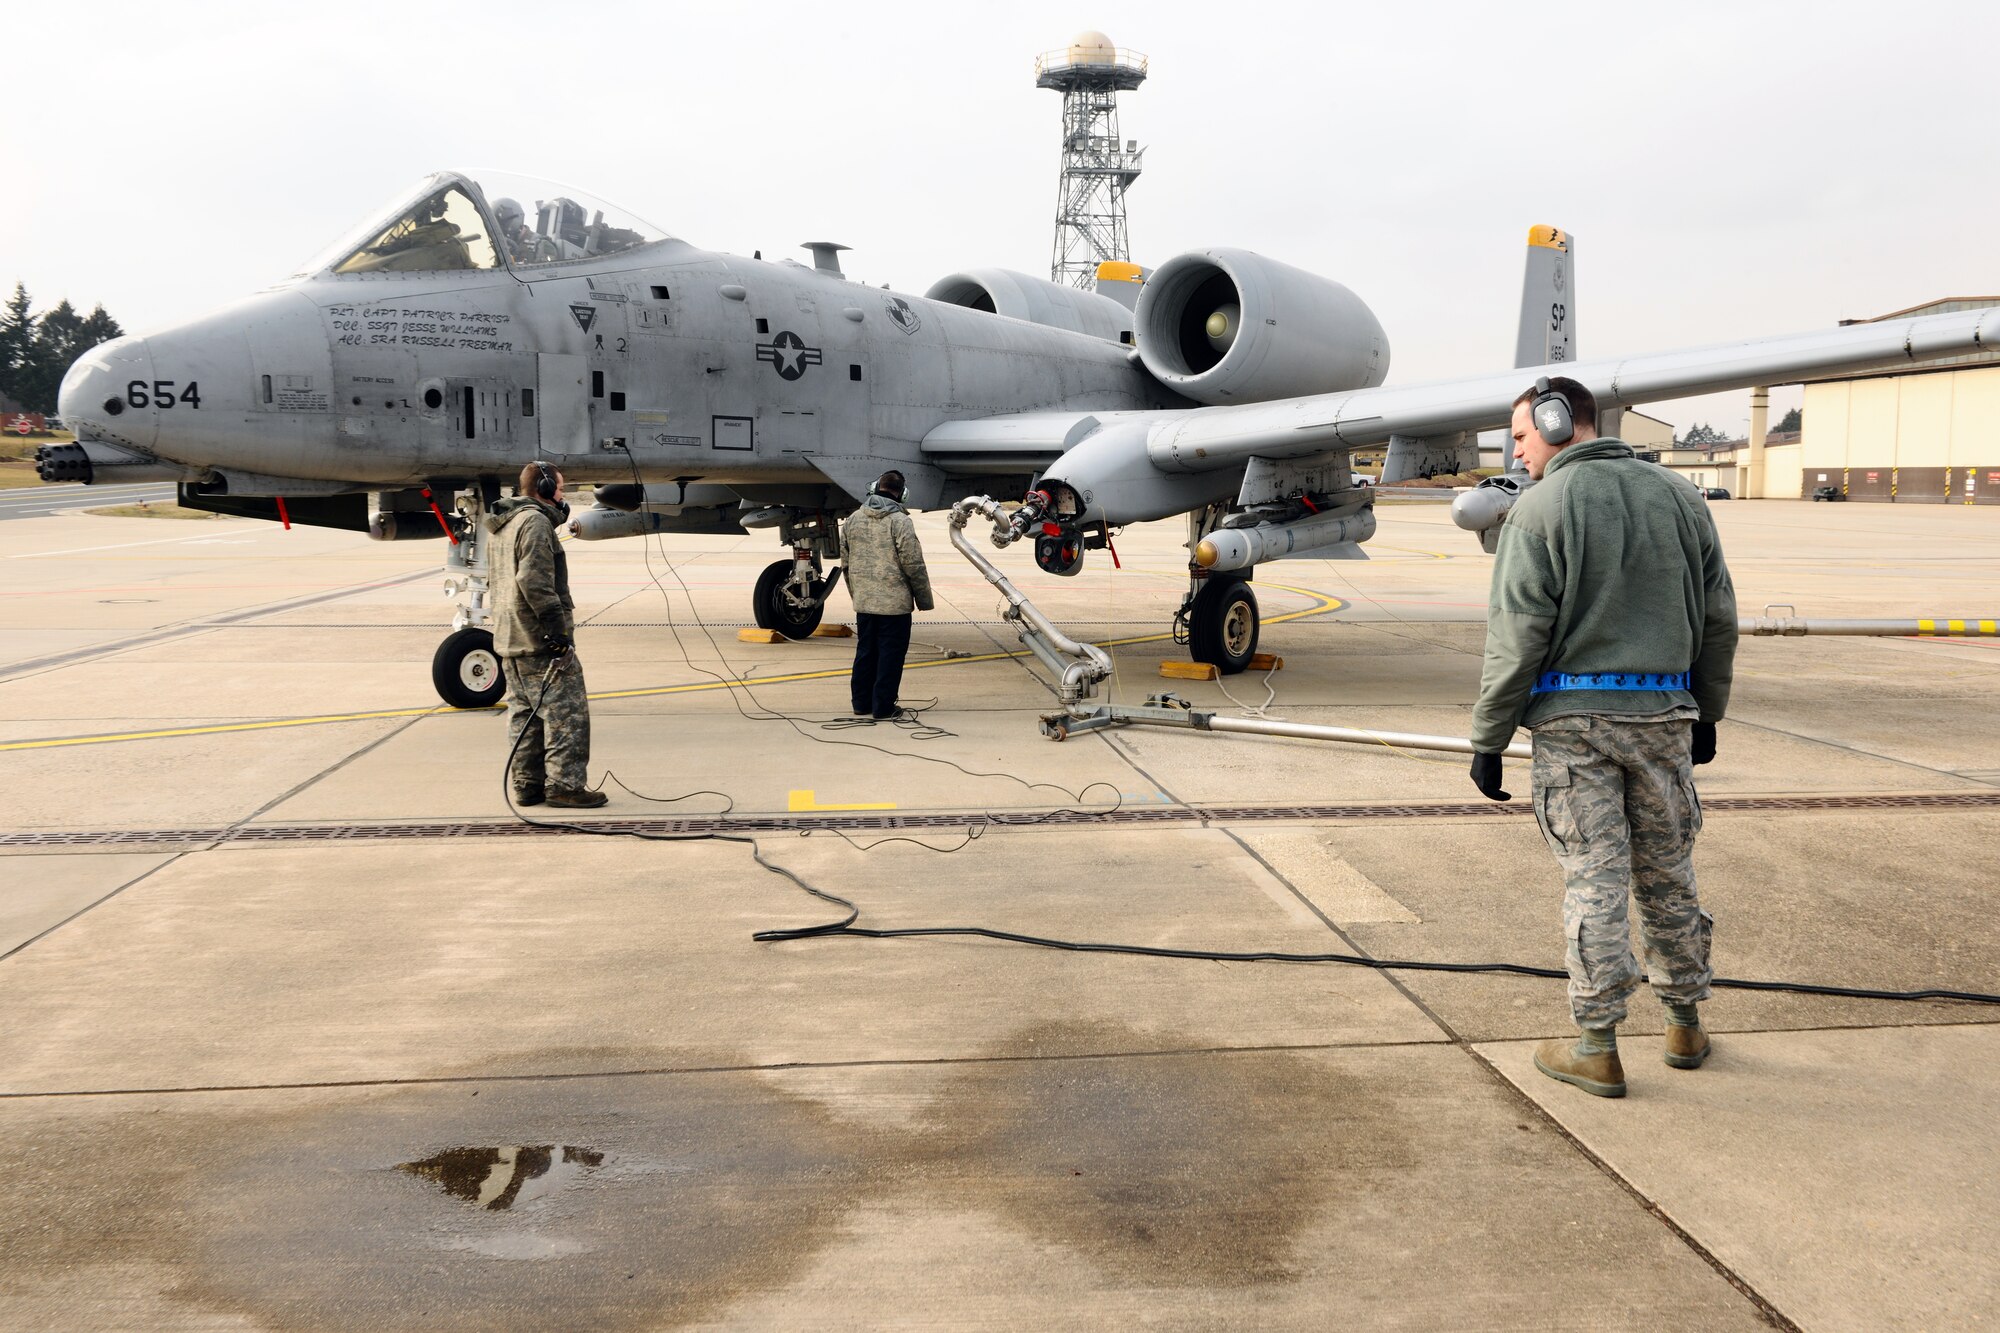 SPANGDAHLEM AIR BASE, Germany – Staff Sgt. Michael Selfridge, right, 52nd Maintenance Operations Squadron aircraft maintenance inspector, inspects the hot-pit refueling of an A-10 Thunderbolt II from the 81st Fighter Squadron ramp three here March 6. The AMXS quality assurance section is made up of eight certified maintenance inspectors who inspect 81st and 480th Fighter Squadron aircraft maintenance processes. Quality assurance modernizes the Air Force’s aircraft maintenance and training by tracking maintenance performance against metrics to improve efficiency, production, and reliability.  (U.S. Air Force photo by Airman 1st Class Dillon Davis/Released)